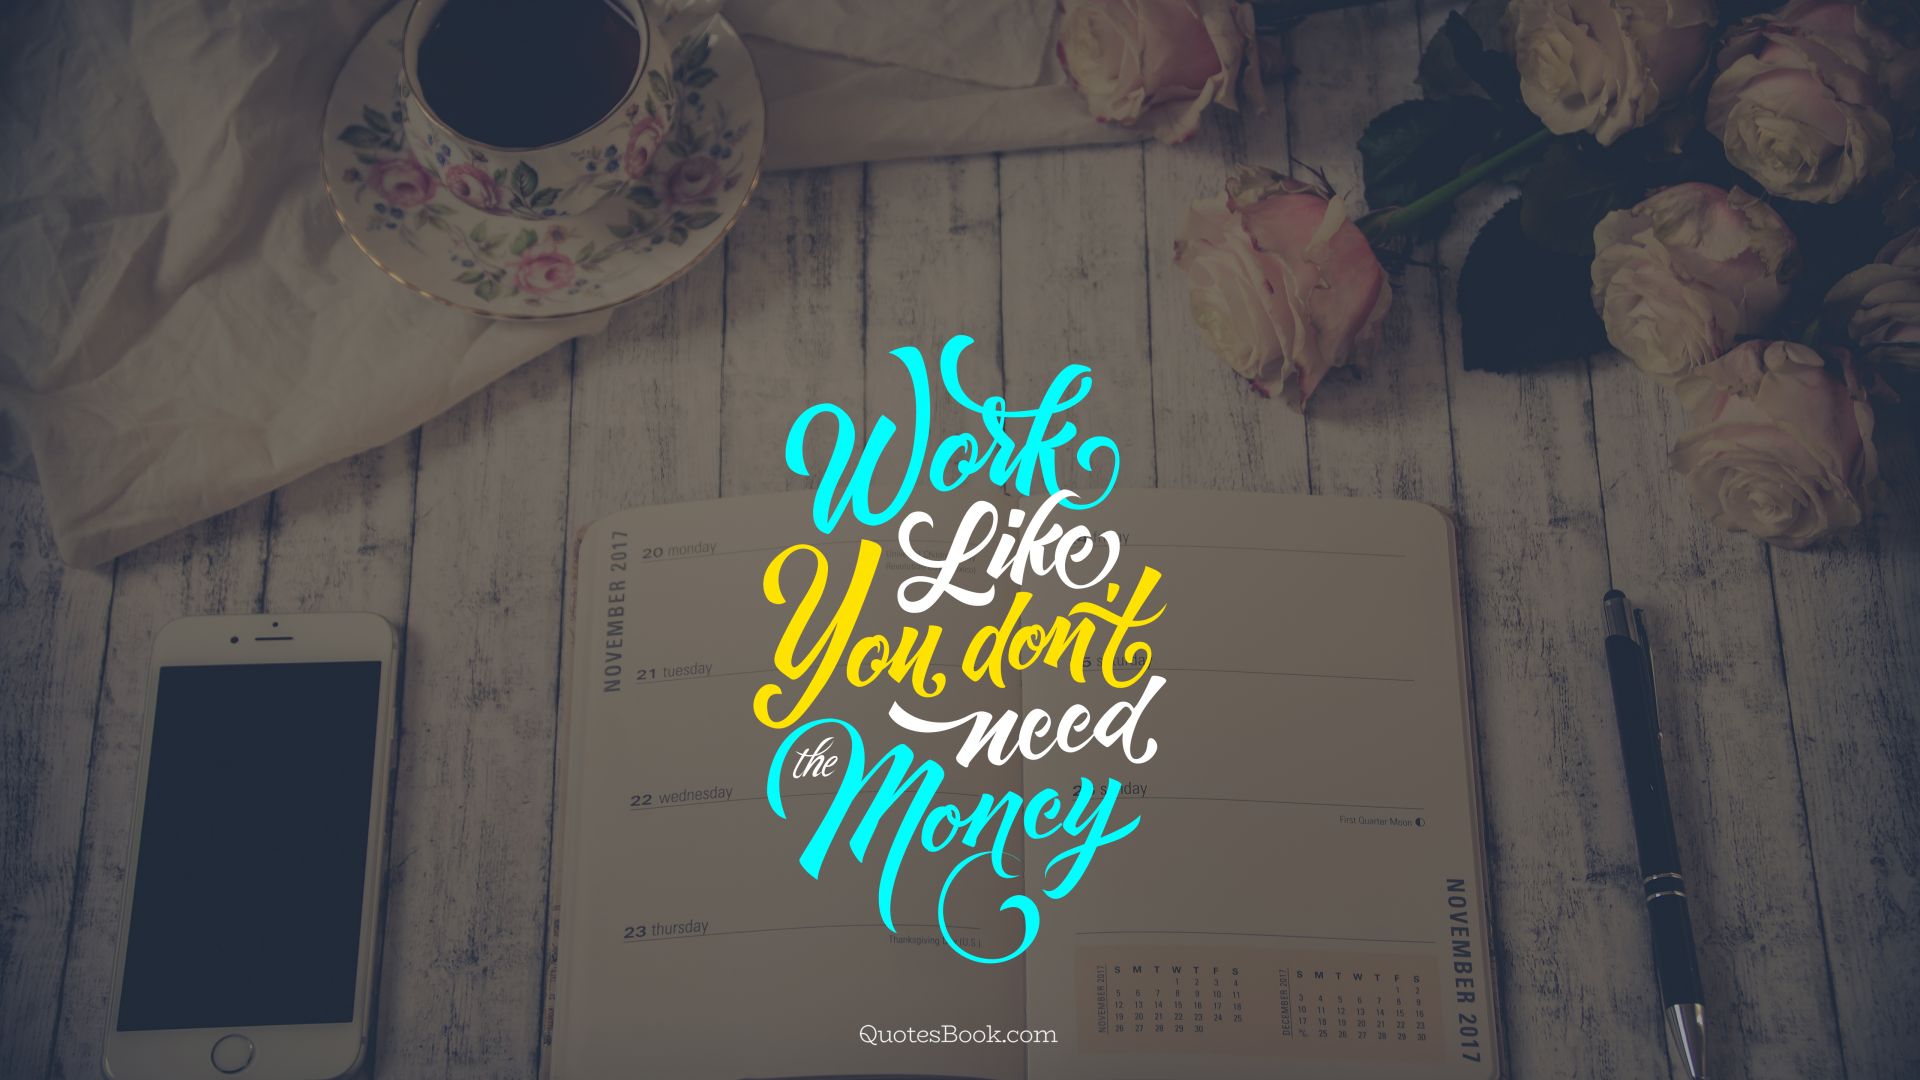 Work like you don't need the money. - Quote by Joseph Joubert